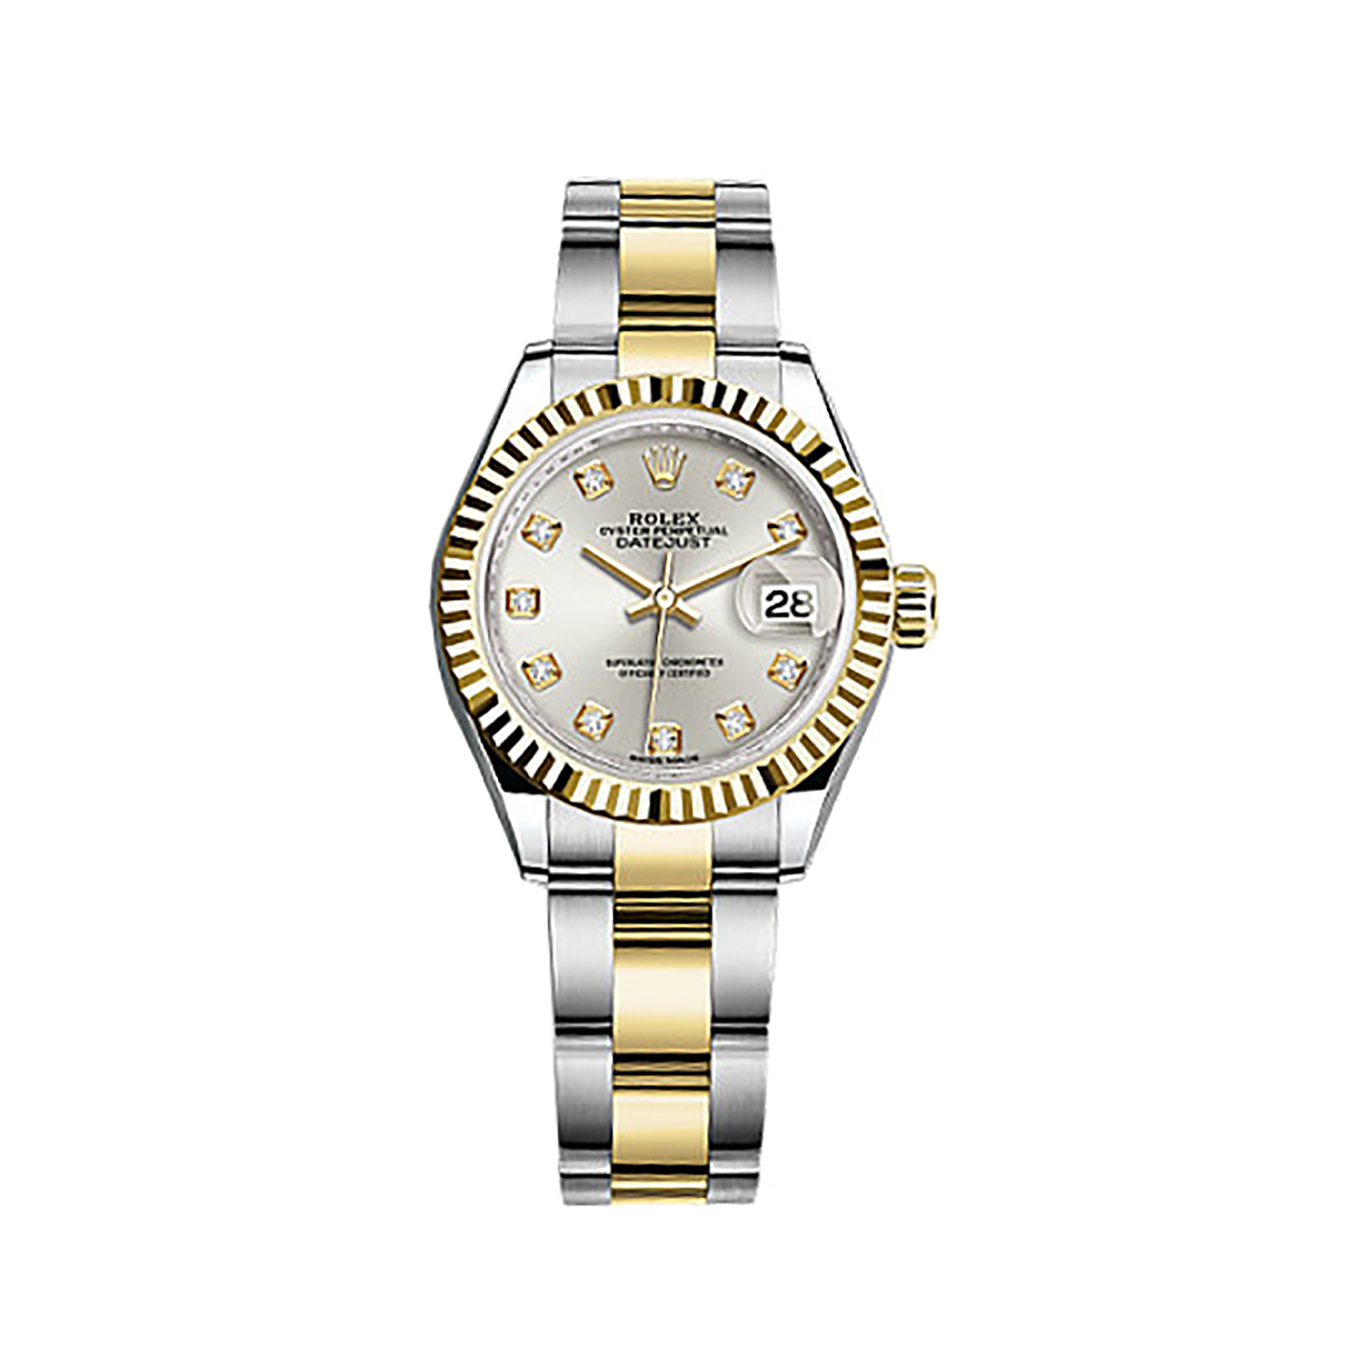 Lady-Datejust 28 279173 Gold & Stainless Steel Watch (Silver Set with Diamonds)